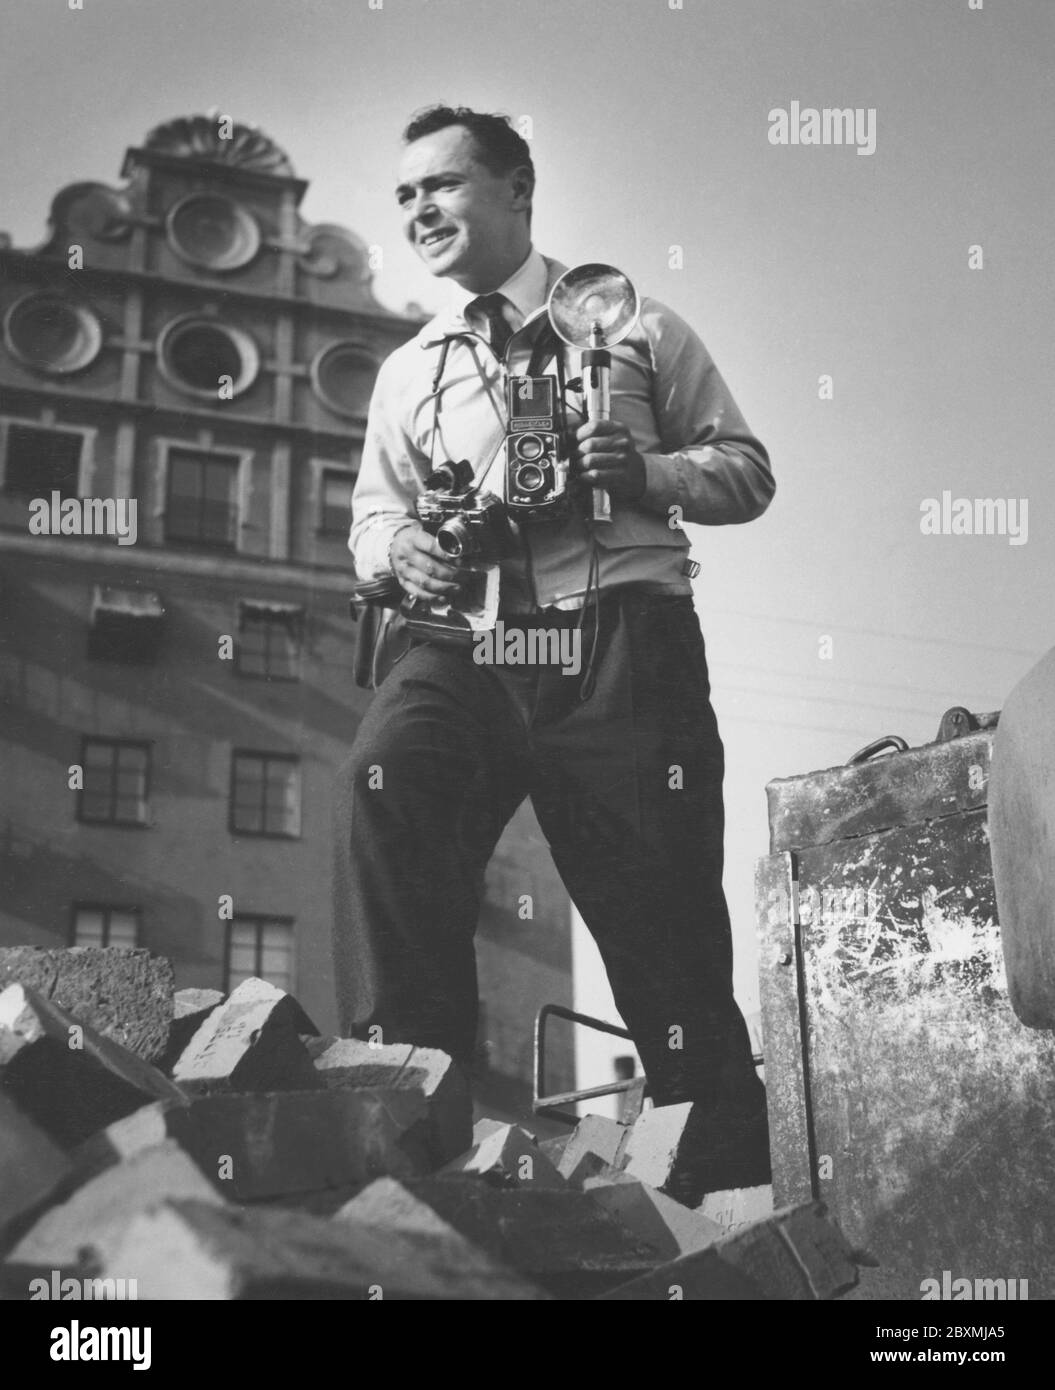 Eliot Elisofon. 1911-1973. American documentary photographer and photojournalist. From 1942 to 1964 he was a staff photographer for Life magazine. Pictured here in Stockholm Sweden when on assignment to photograph swedish champion runners Gunder Hägg and Arne Andersson when competing on Stockholms stadion. 1944 Stock Photo